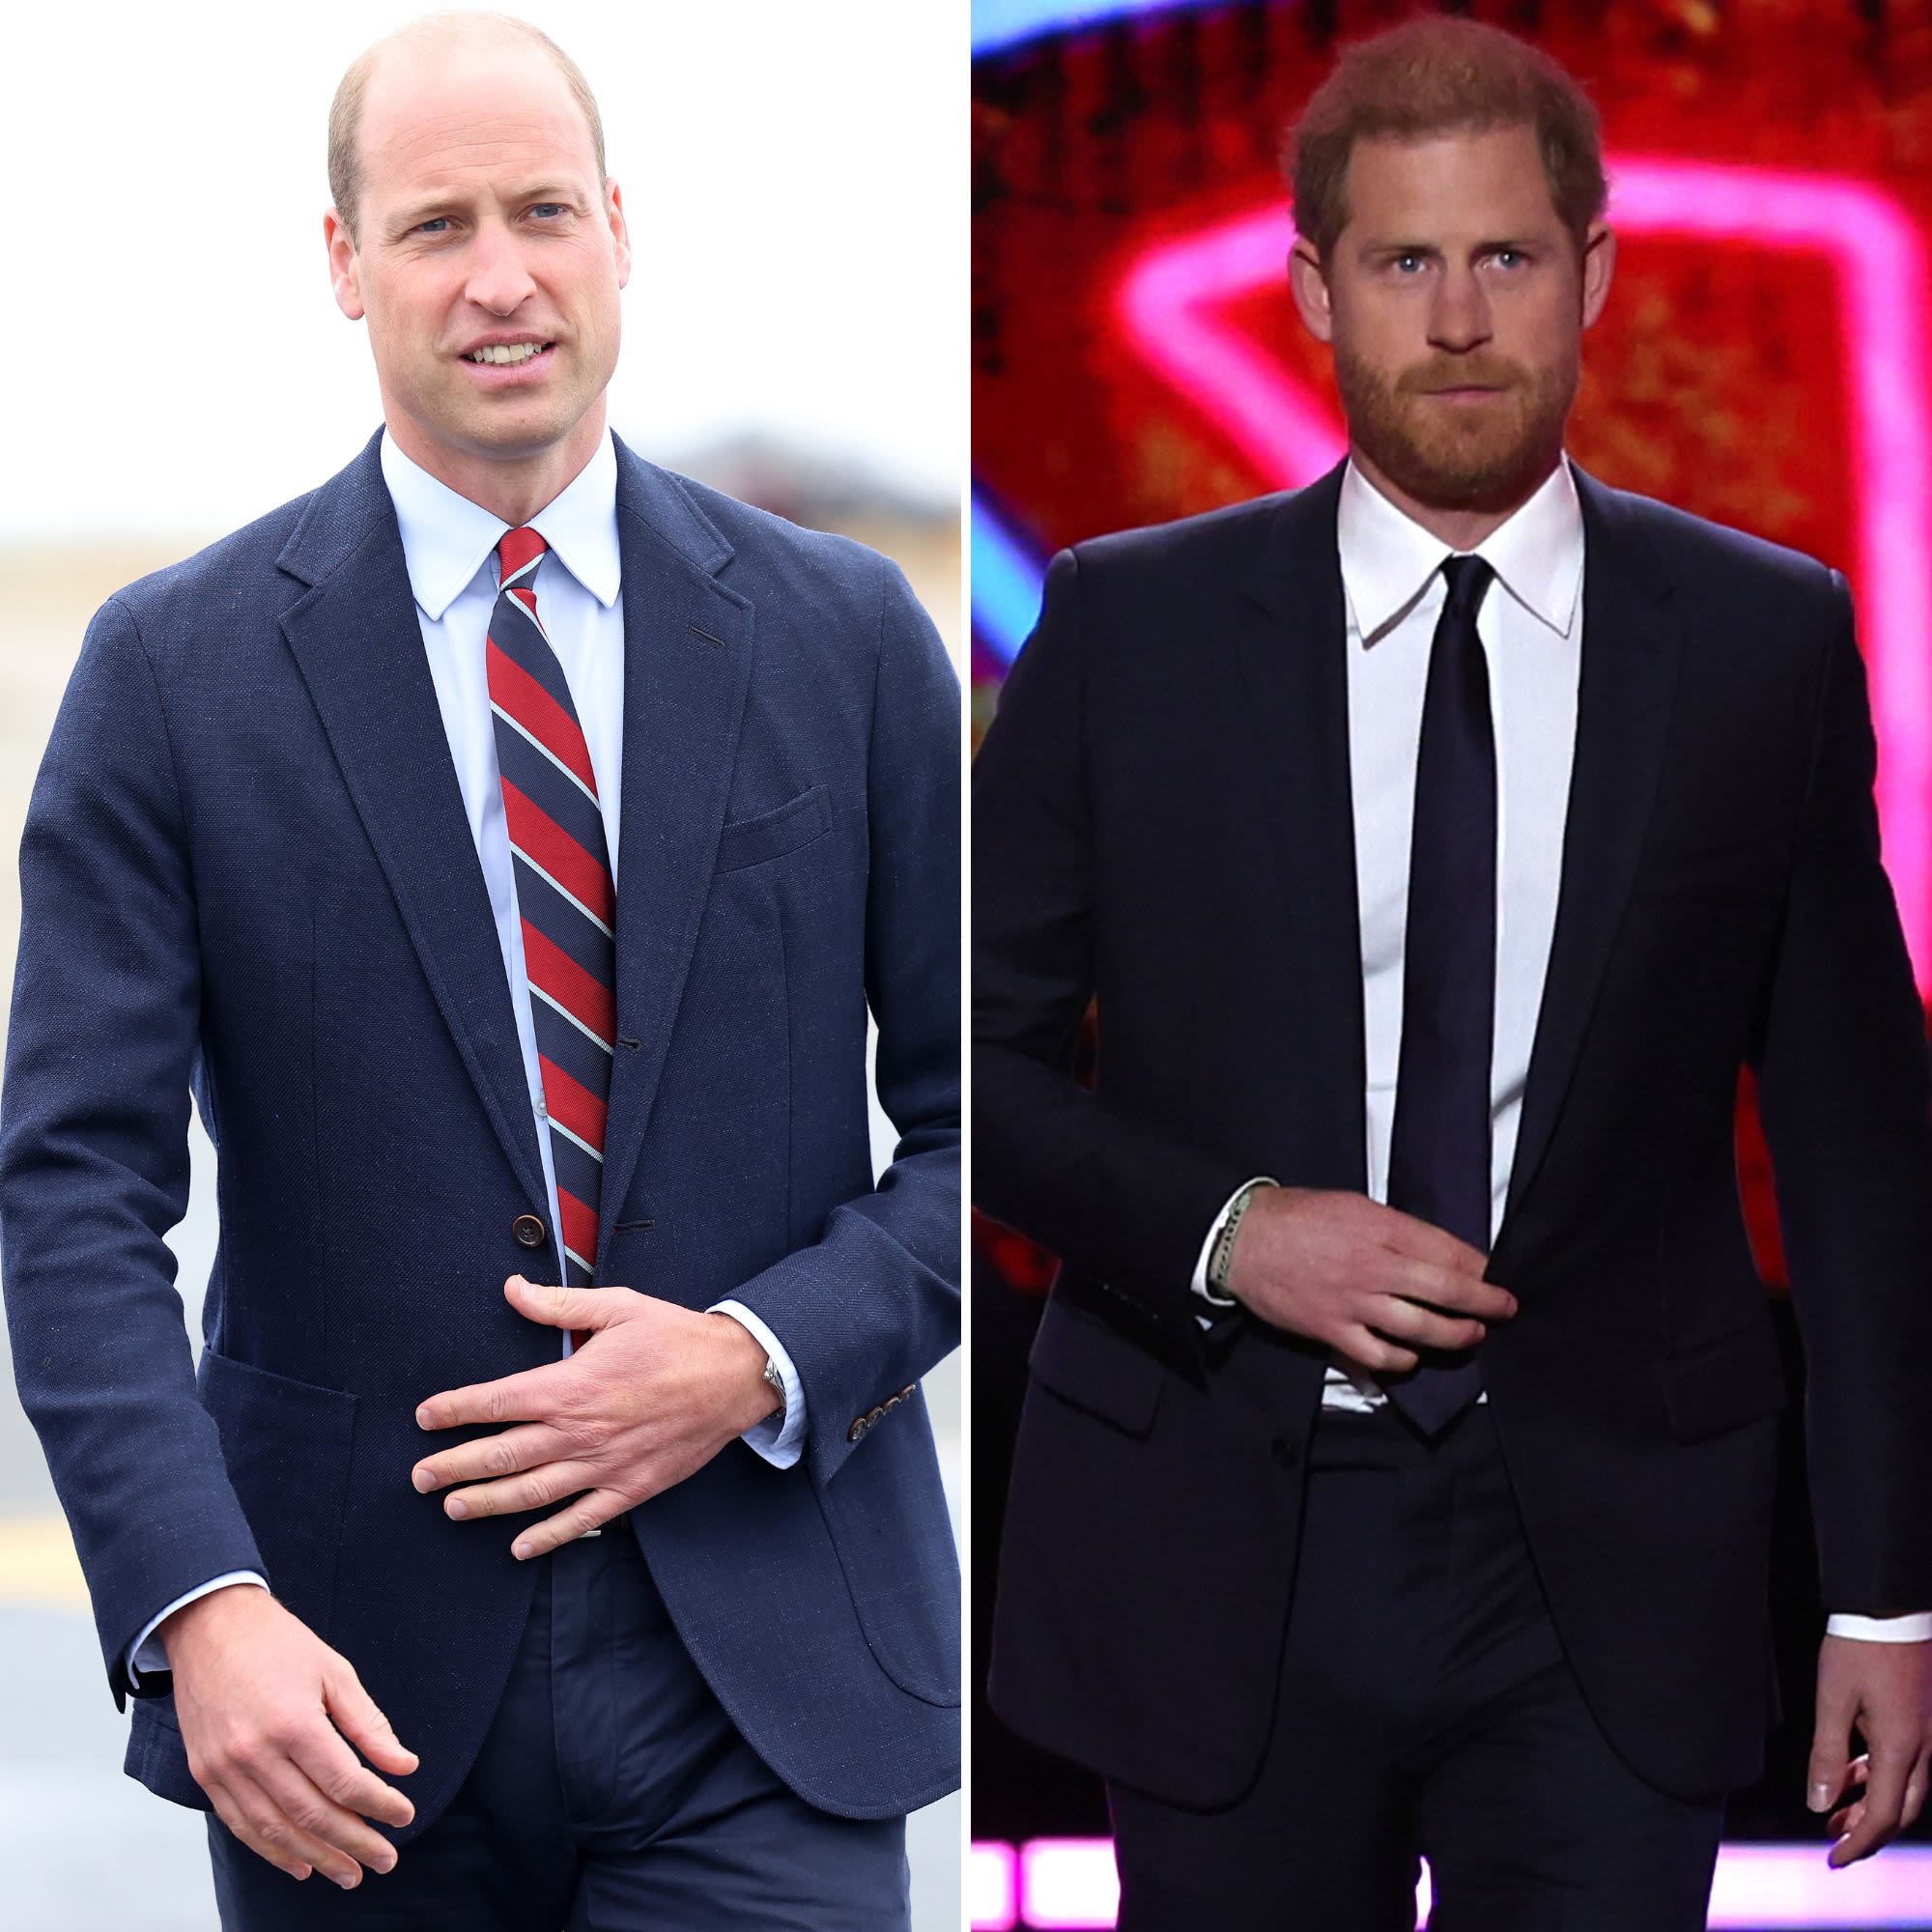 Prince William Refuses to ‘Lay Down the Hatchet’ Amid Feud With Brother Prince Harry